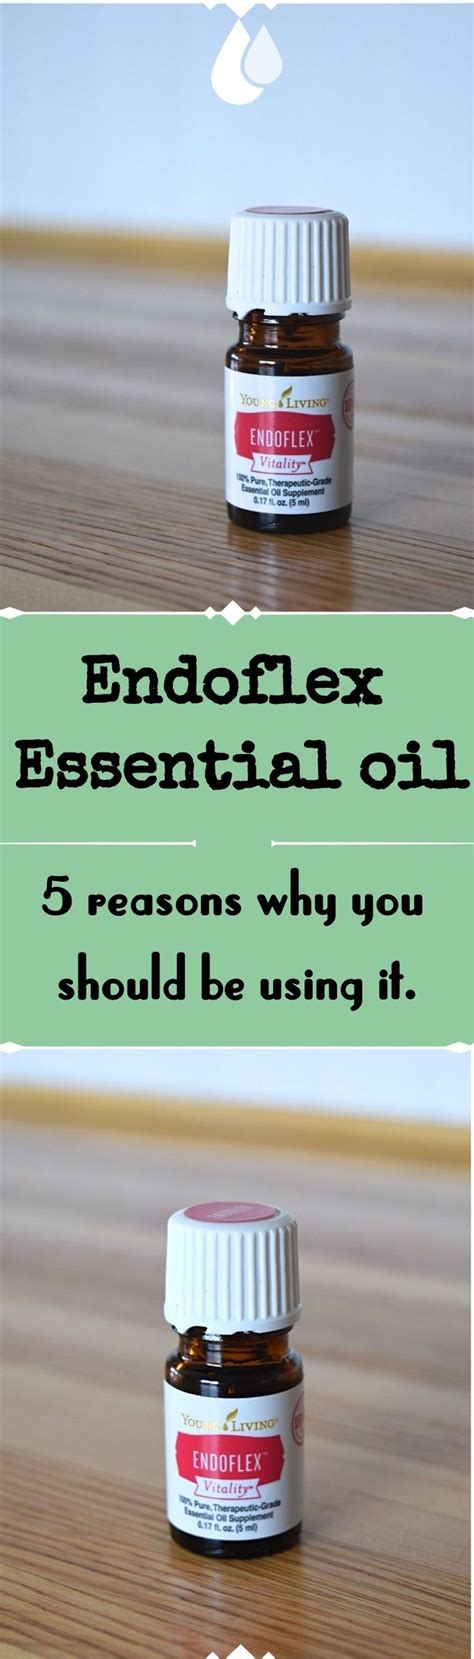 It had a lot of beneficial information on blending essential oils, including some great diy's to create and use in your home. 5 Reasons you should use Endoflex Essential oil | Gentle ...